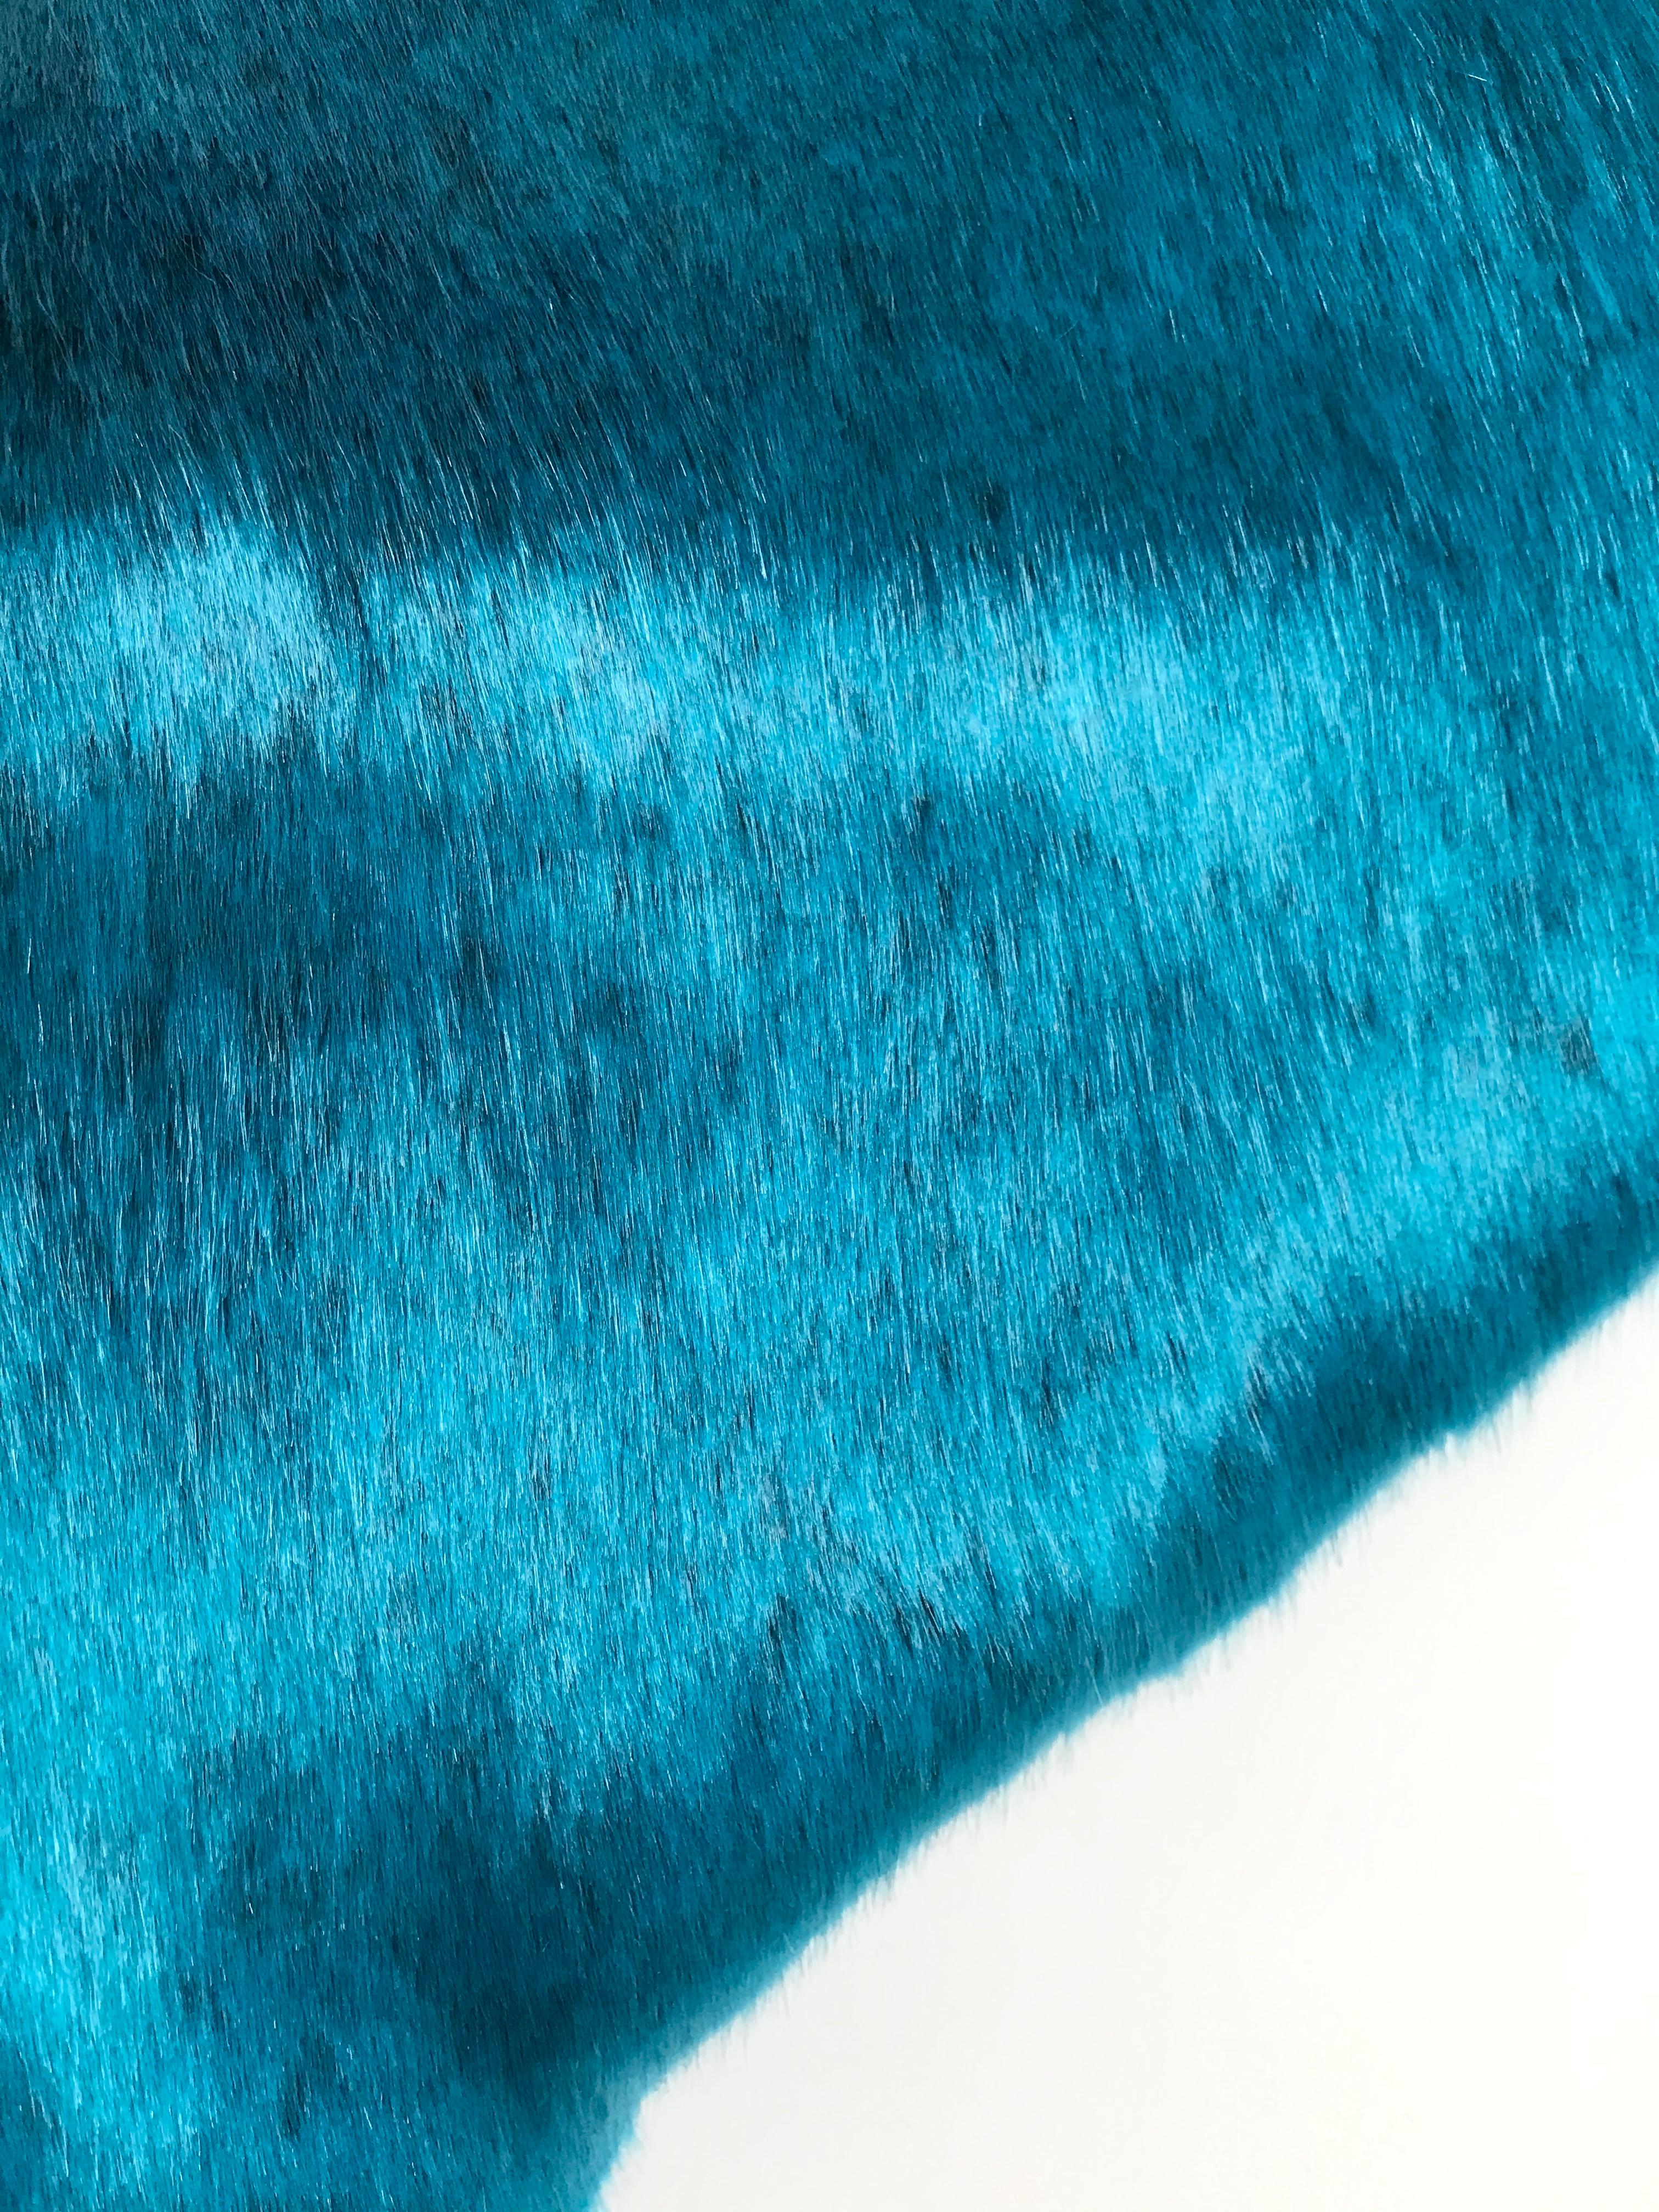 This vibrant Pelush teal faux fur throw blanket is made with the highest quality man made pelage and it's a beautiful replica of the chinchilla fur. Extra soft and plush, the color is custom made for Pelush. The backing has a beautiful Italian tie